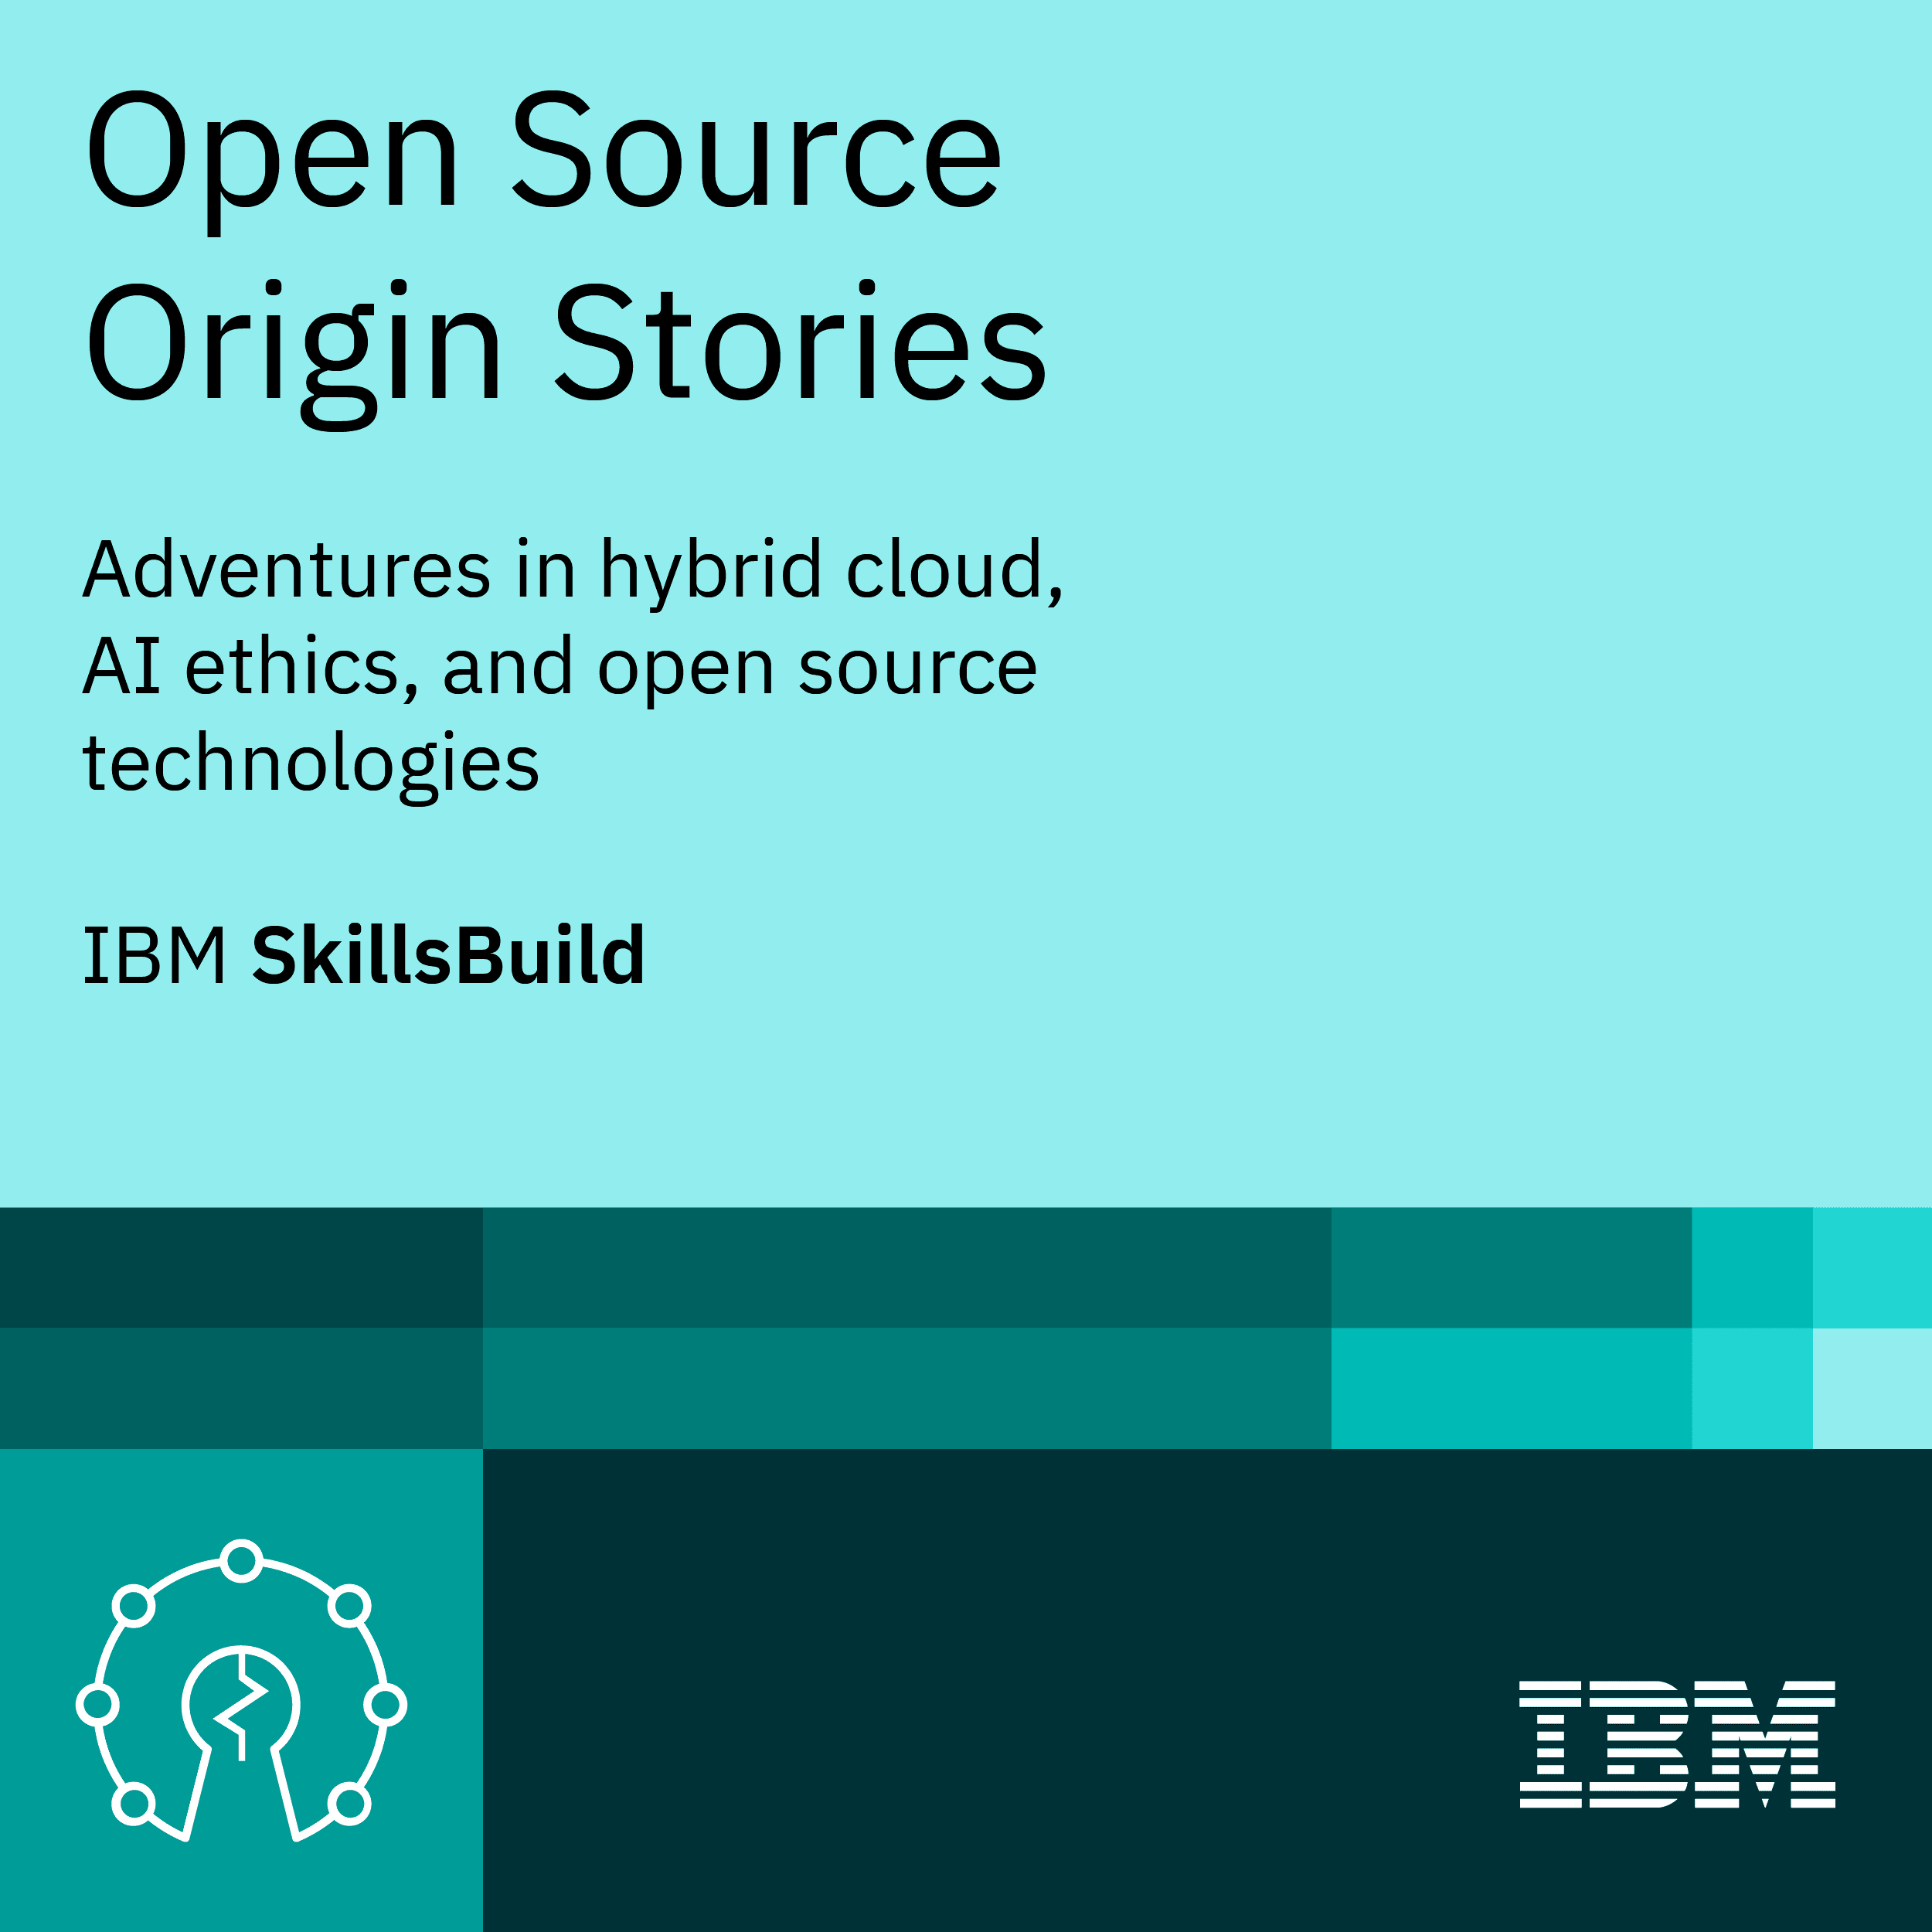 Open Source Origin Stories: Adventures in hybrid cloud, AI ethics, and open source technologies